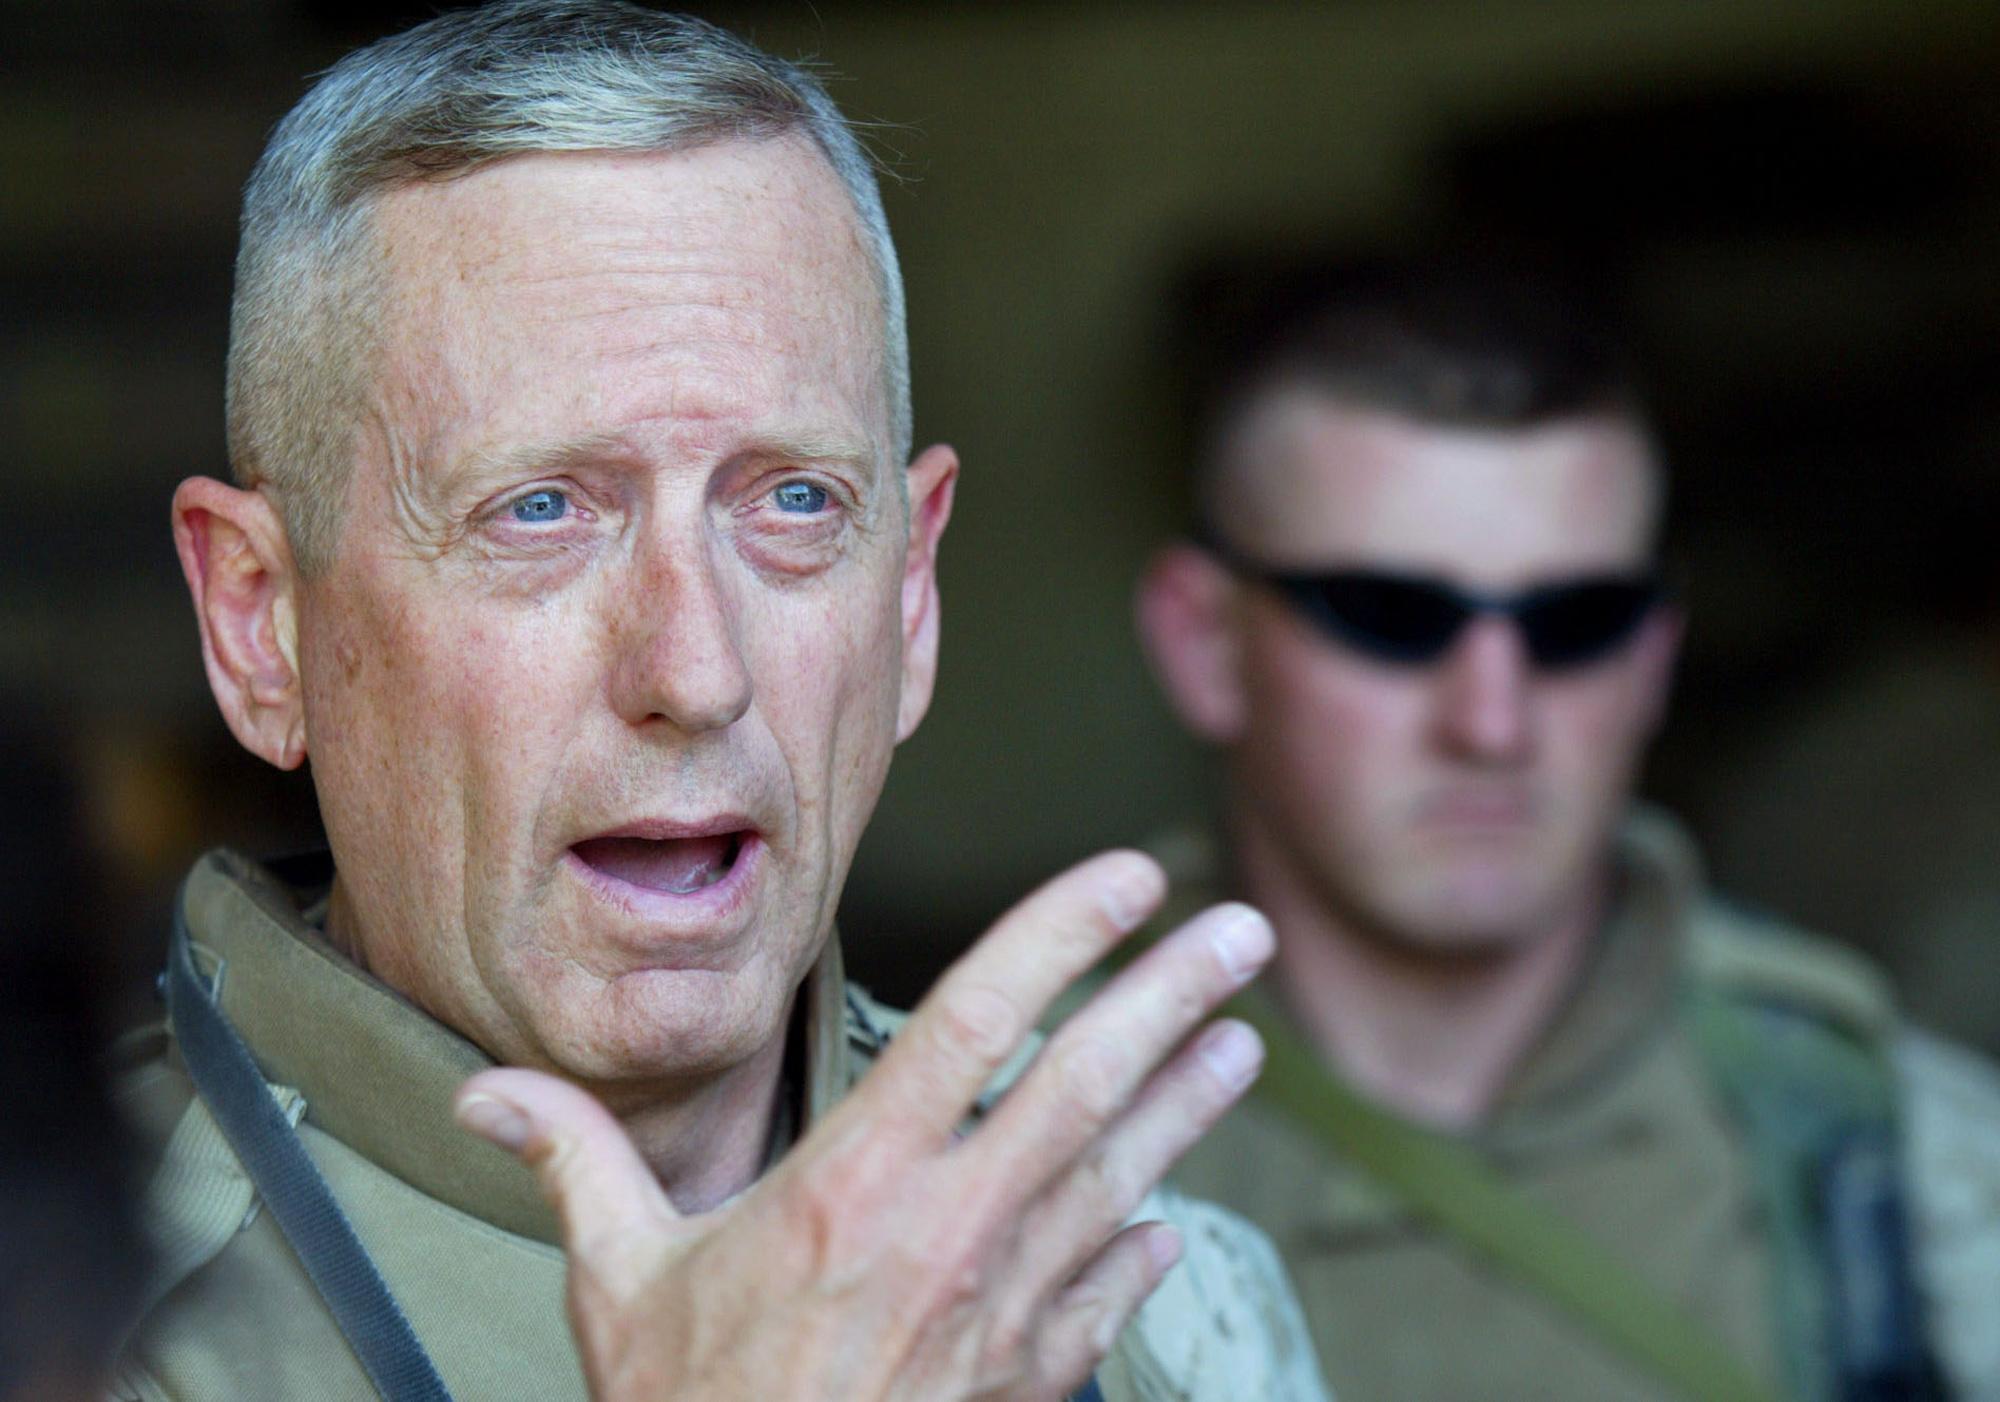 Mattis makes Time's '100 Most Influential People' list